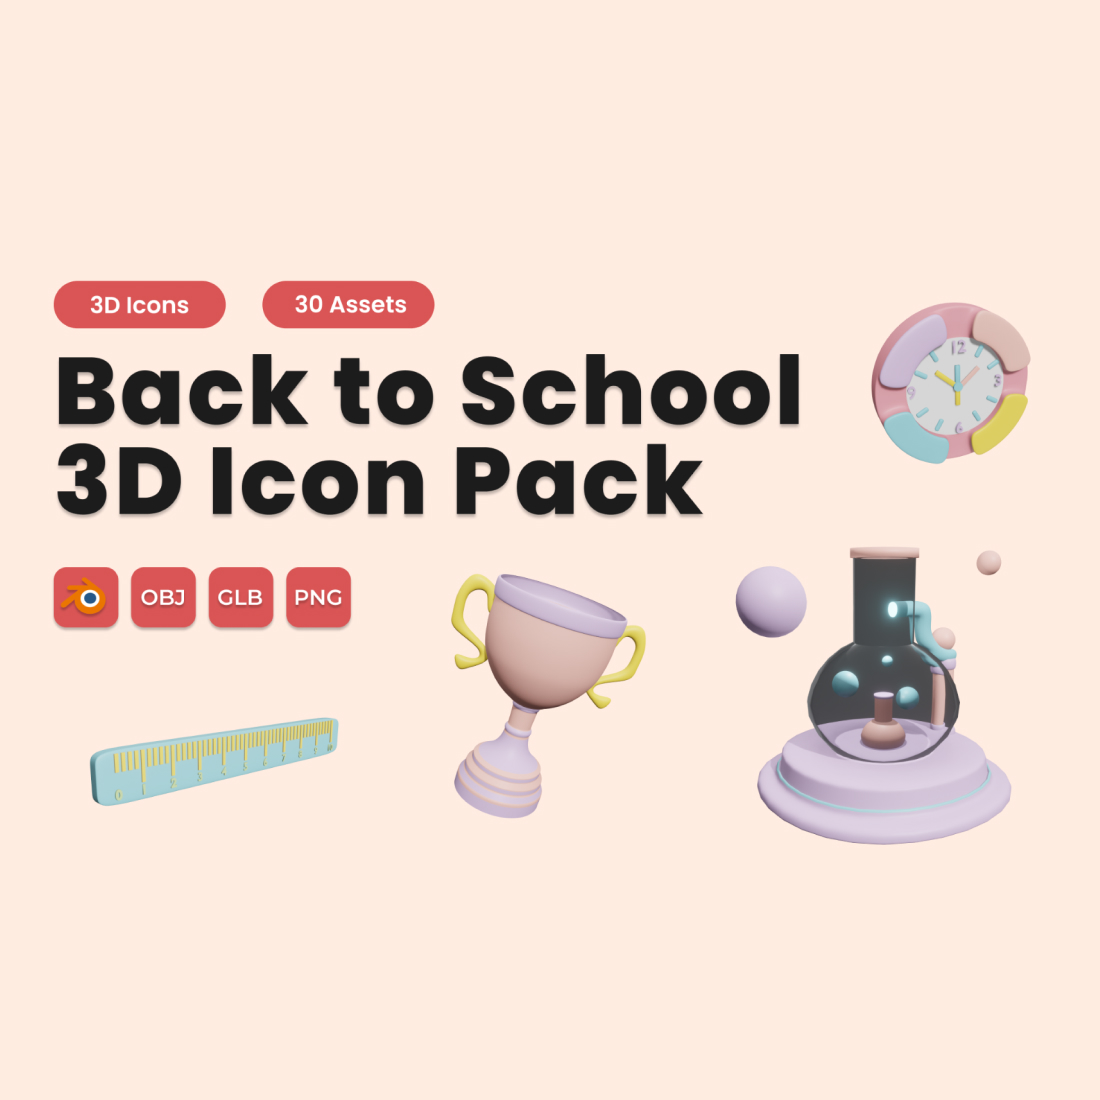 Back to School 3D Icon Pack Vol 1 preview image.